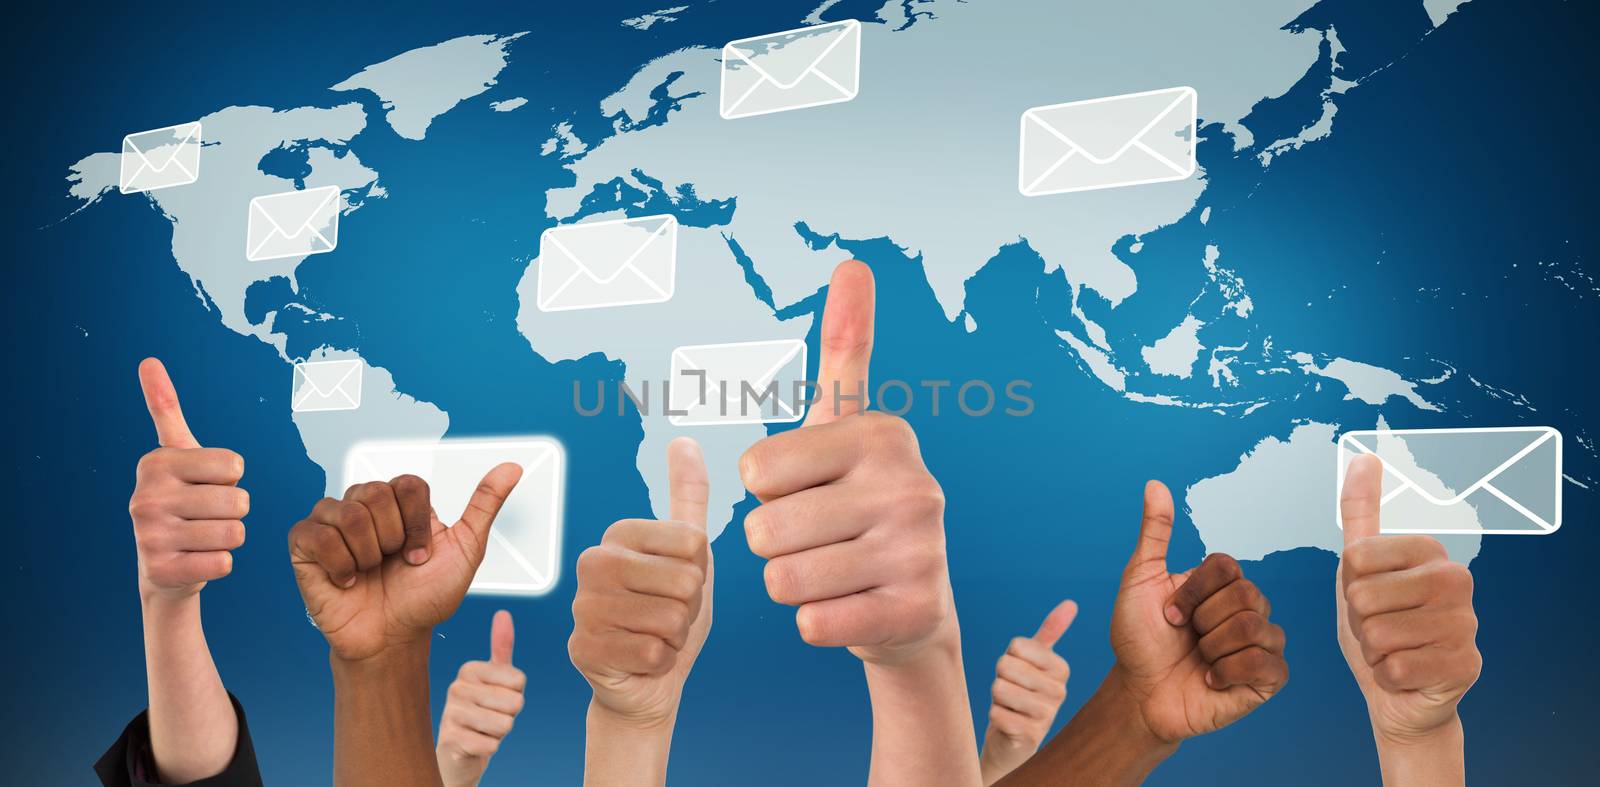 Hands showing thumbs up against world map with envelopes